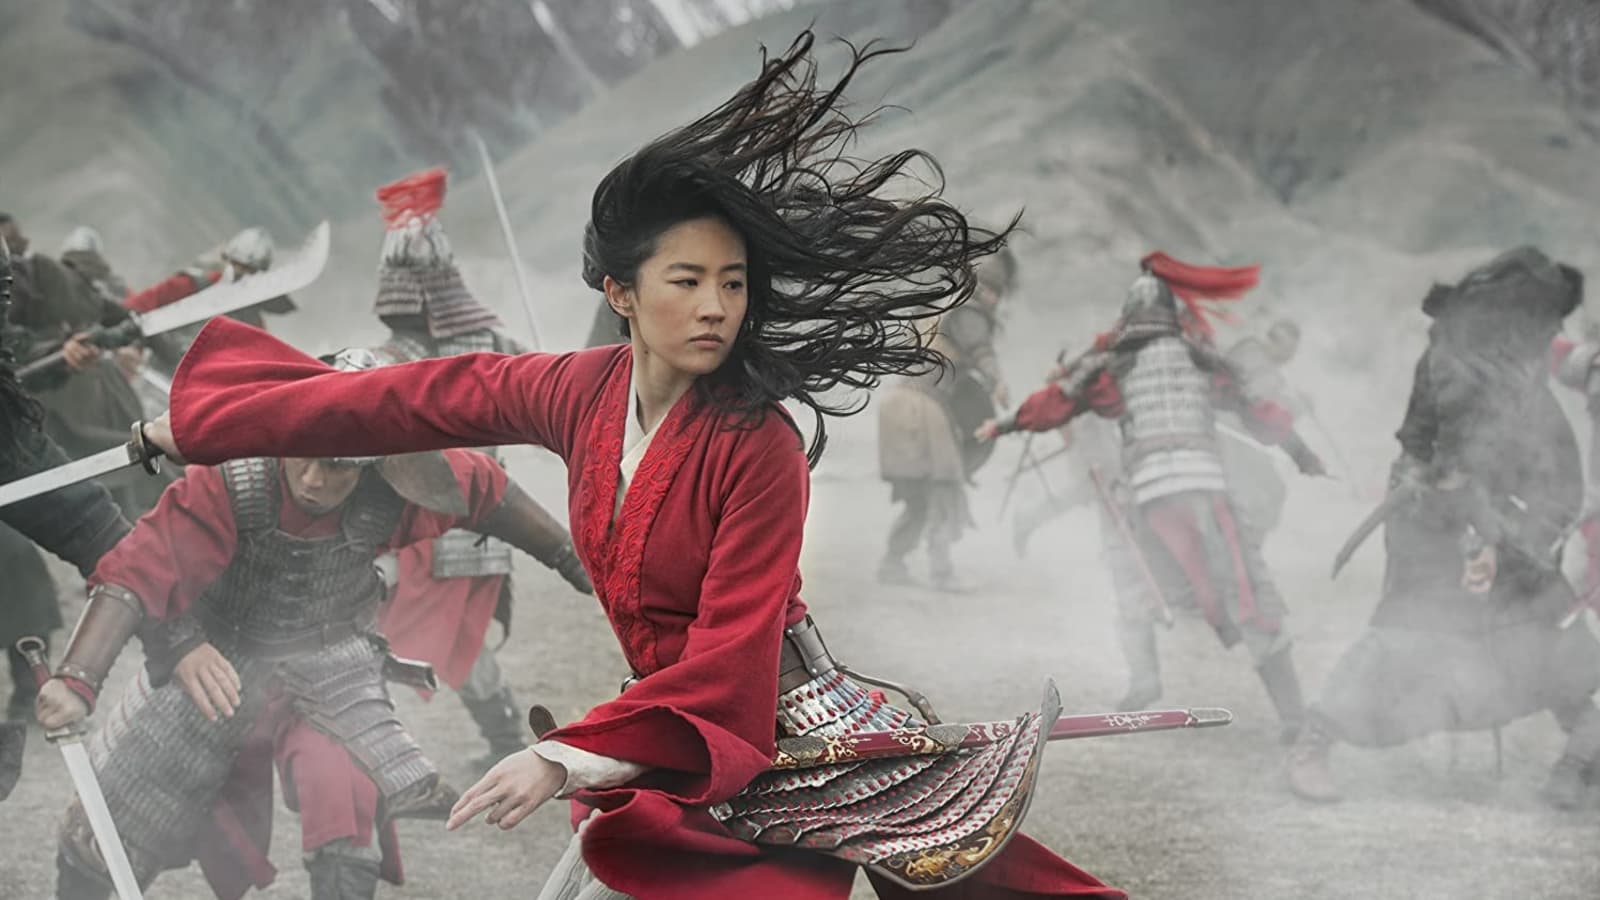 Mulan' skipping theaters is a big blow to cinema owners' bottom line